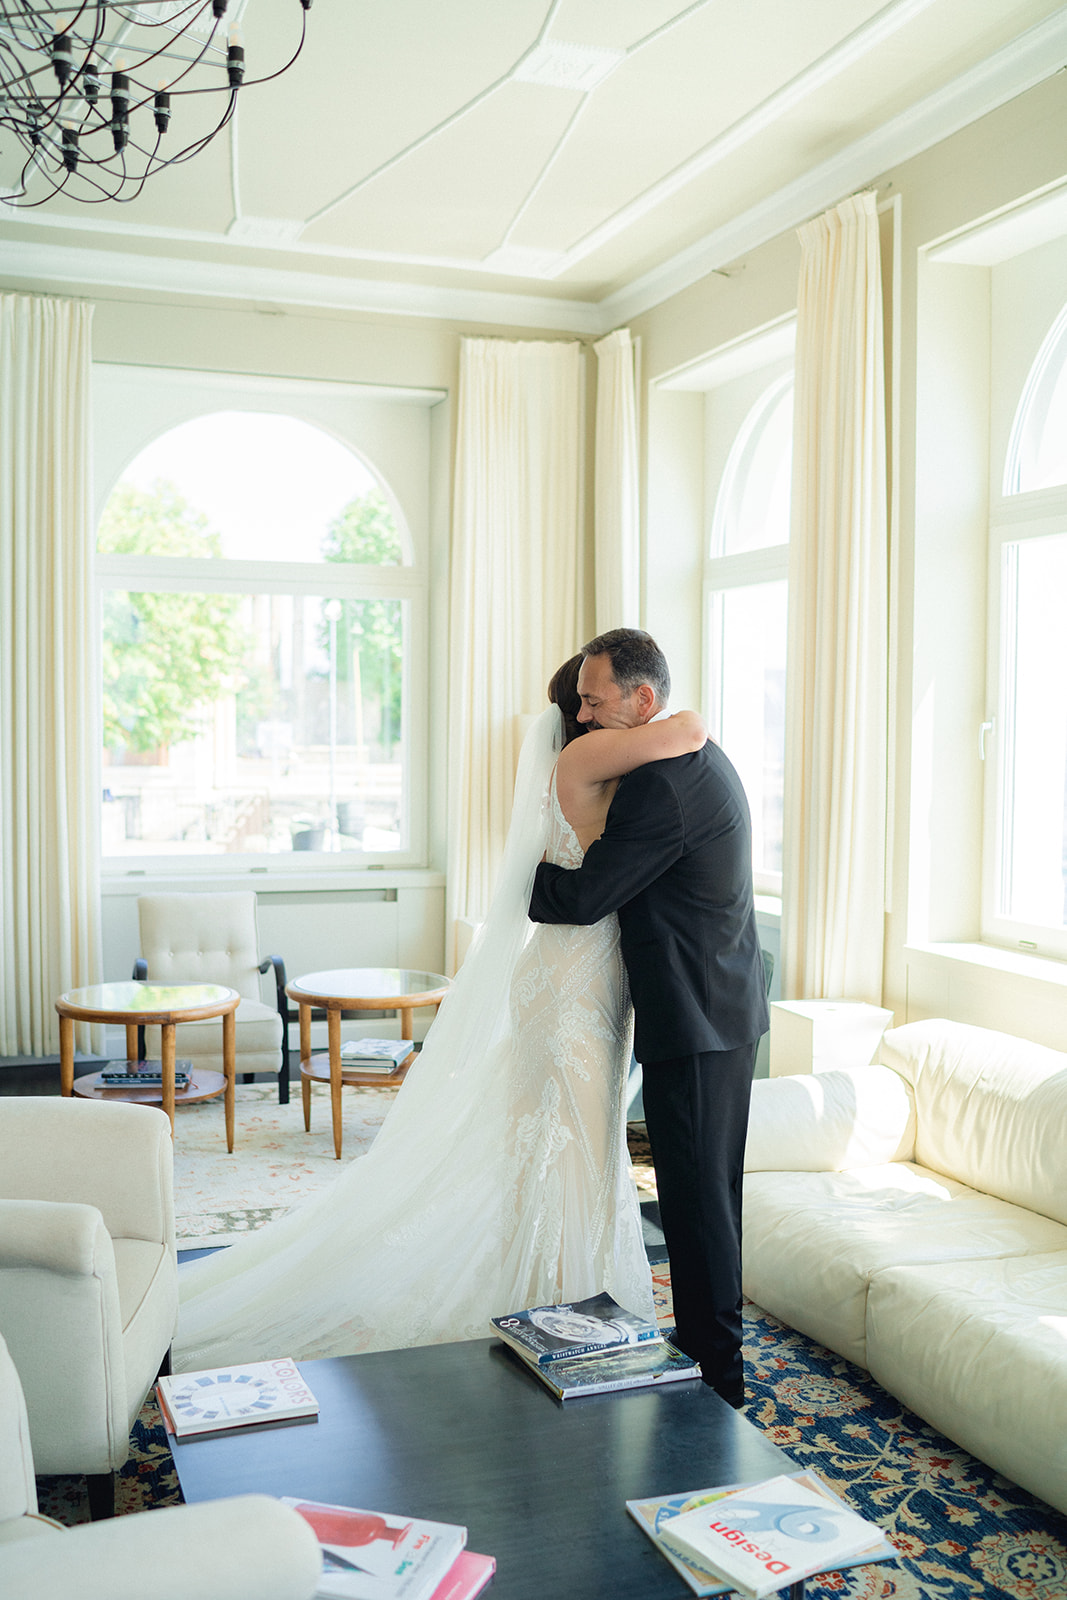 he bride embraces her father dressed in her wedding gown and veil in the lobby of Hotel Bellariva in Riva del Garda